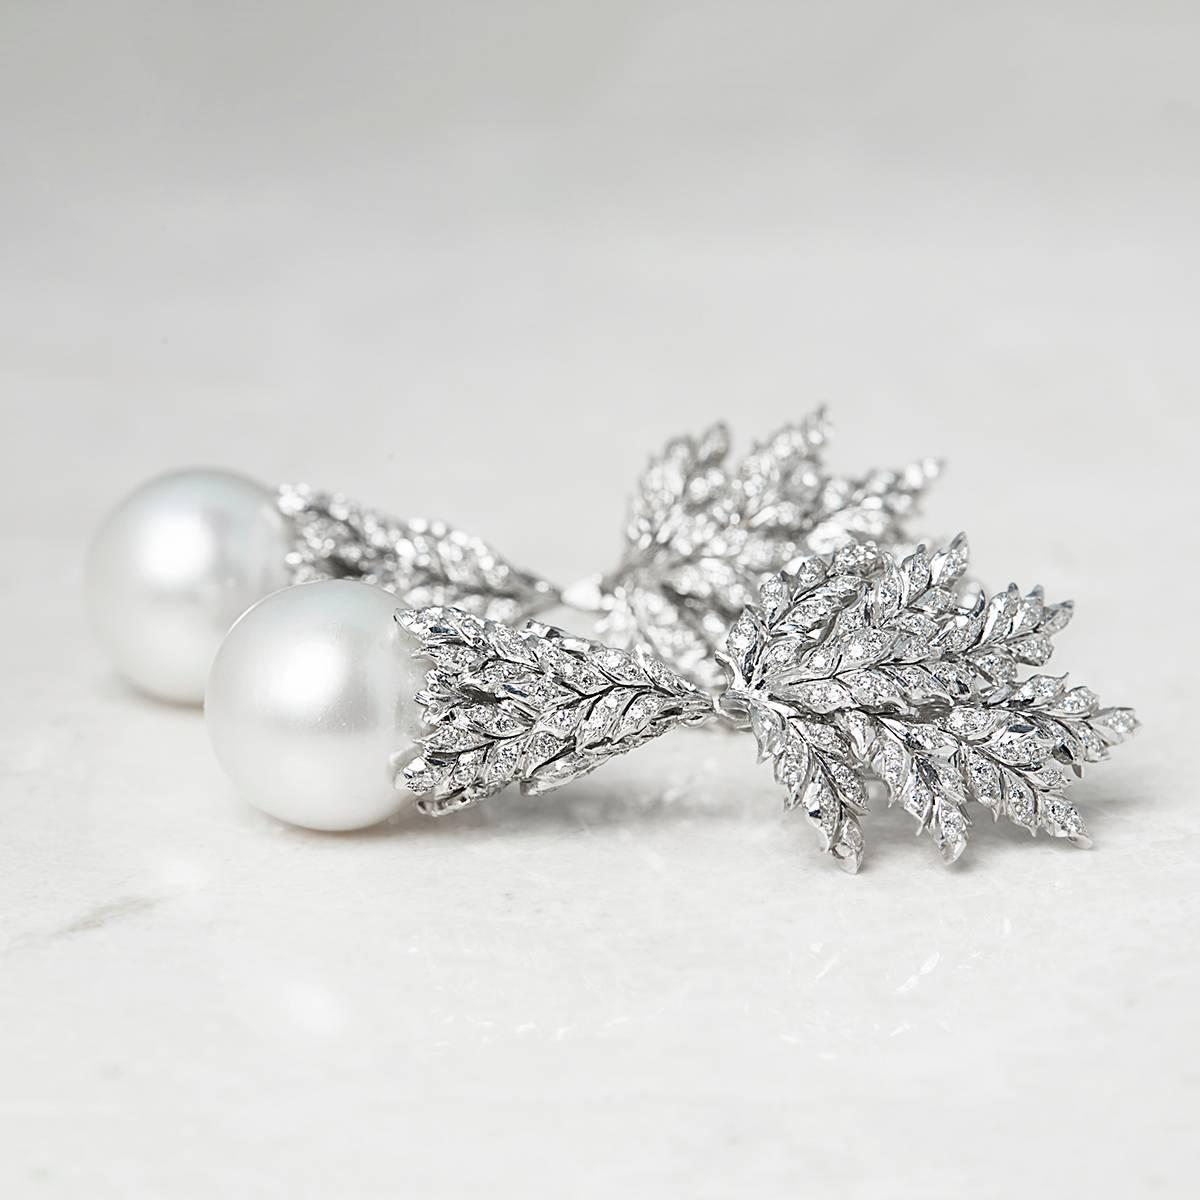 Xupes Code: COM929
Brand: Buccellati
Description: 18k White Gold South Sea Pearl & 2.71ct Diamond Drop Earrings
Accompanied With: Box & Papers
Gender: Ladies
Earring Length: 6.2cm
Earring Width: 2.4cm
Earring Back: Omega
Condition: 9
Material: White